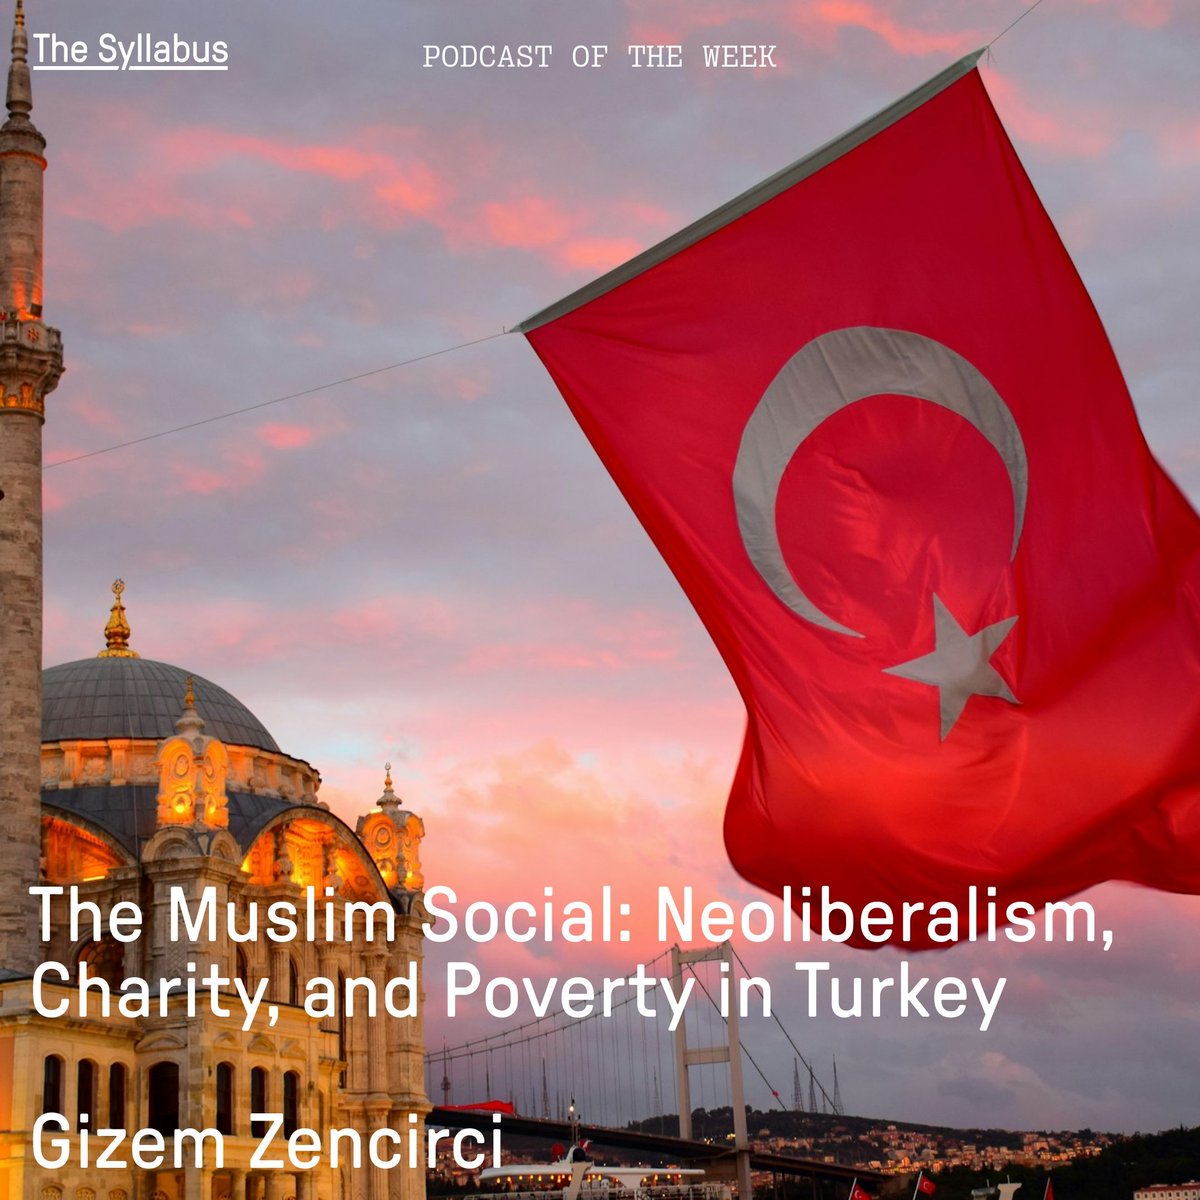 Our podcast of the week highlights how Turkey's ruling party and other actors blend modern neoliberal reforms with traditional Islamic charity to form a unique public welfare system termed the 'Muslim social'. With @maviphd buff.ly/3Vuntgl